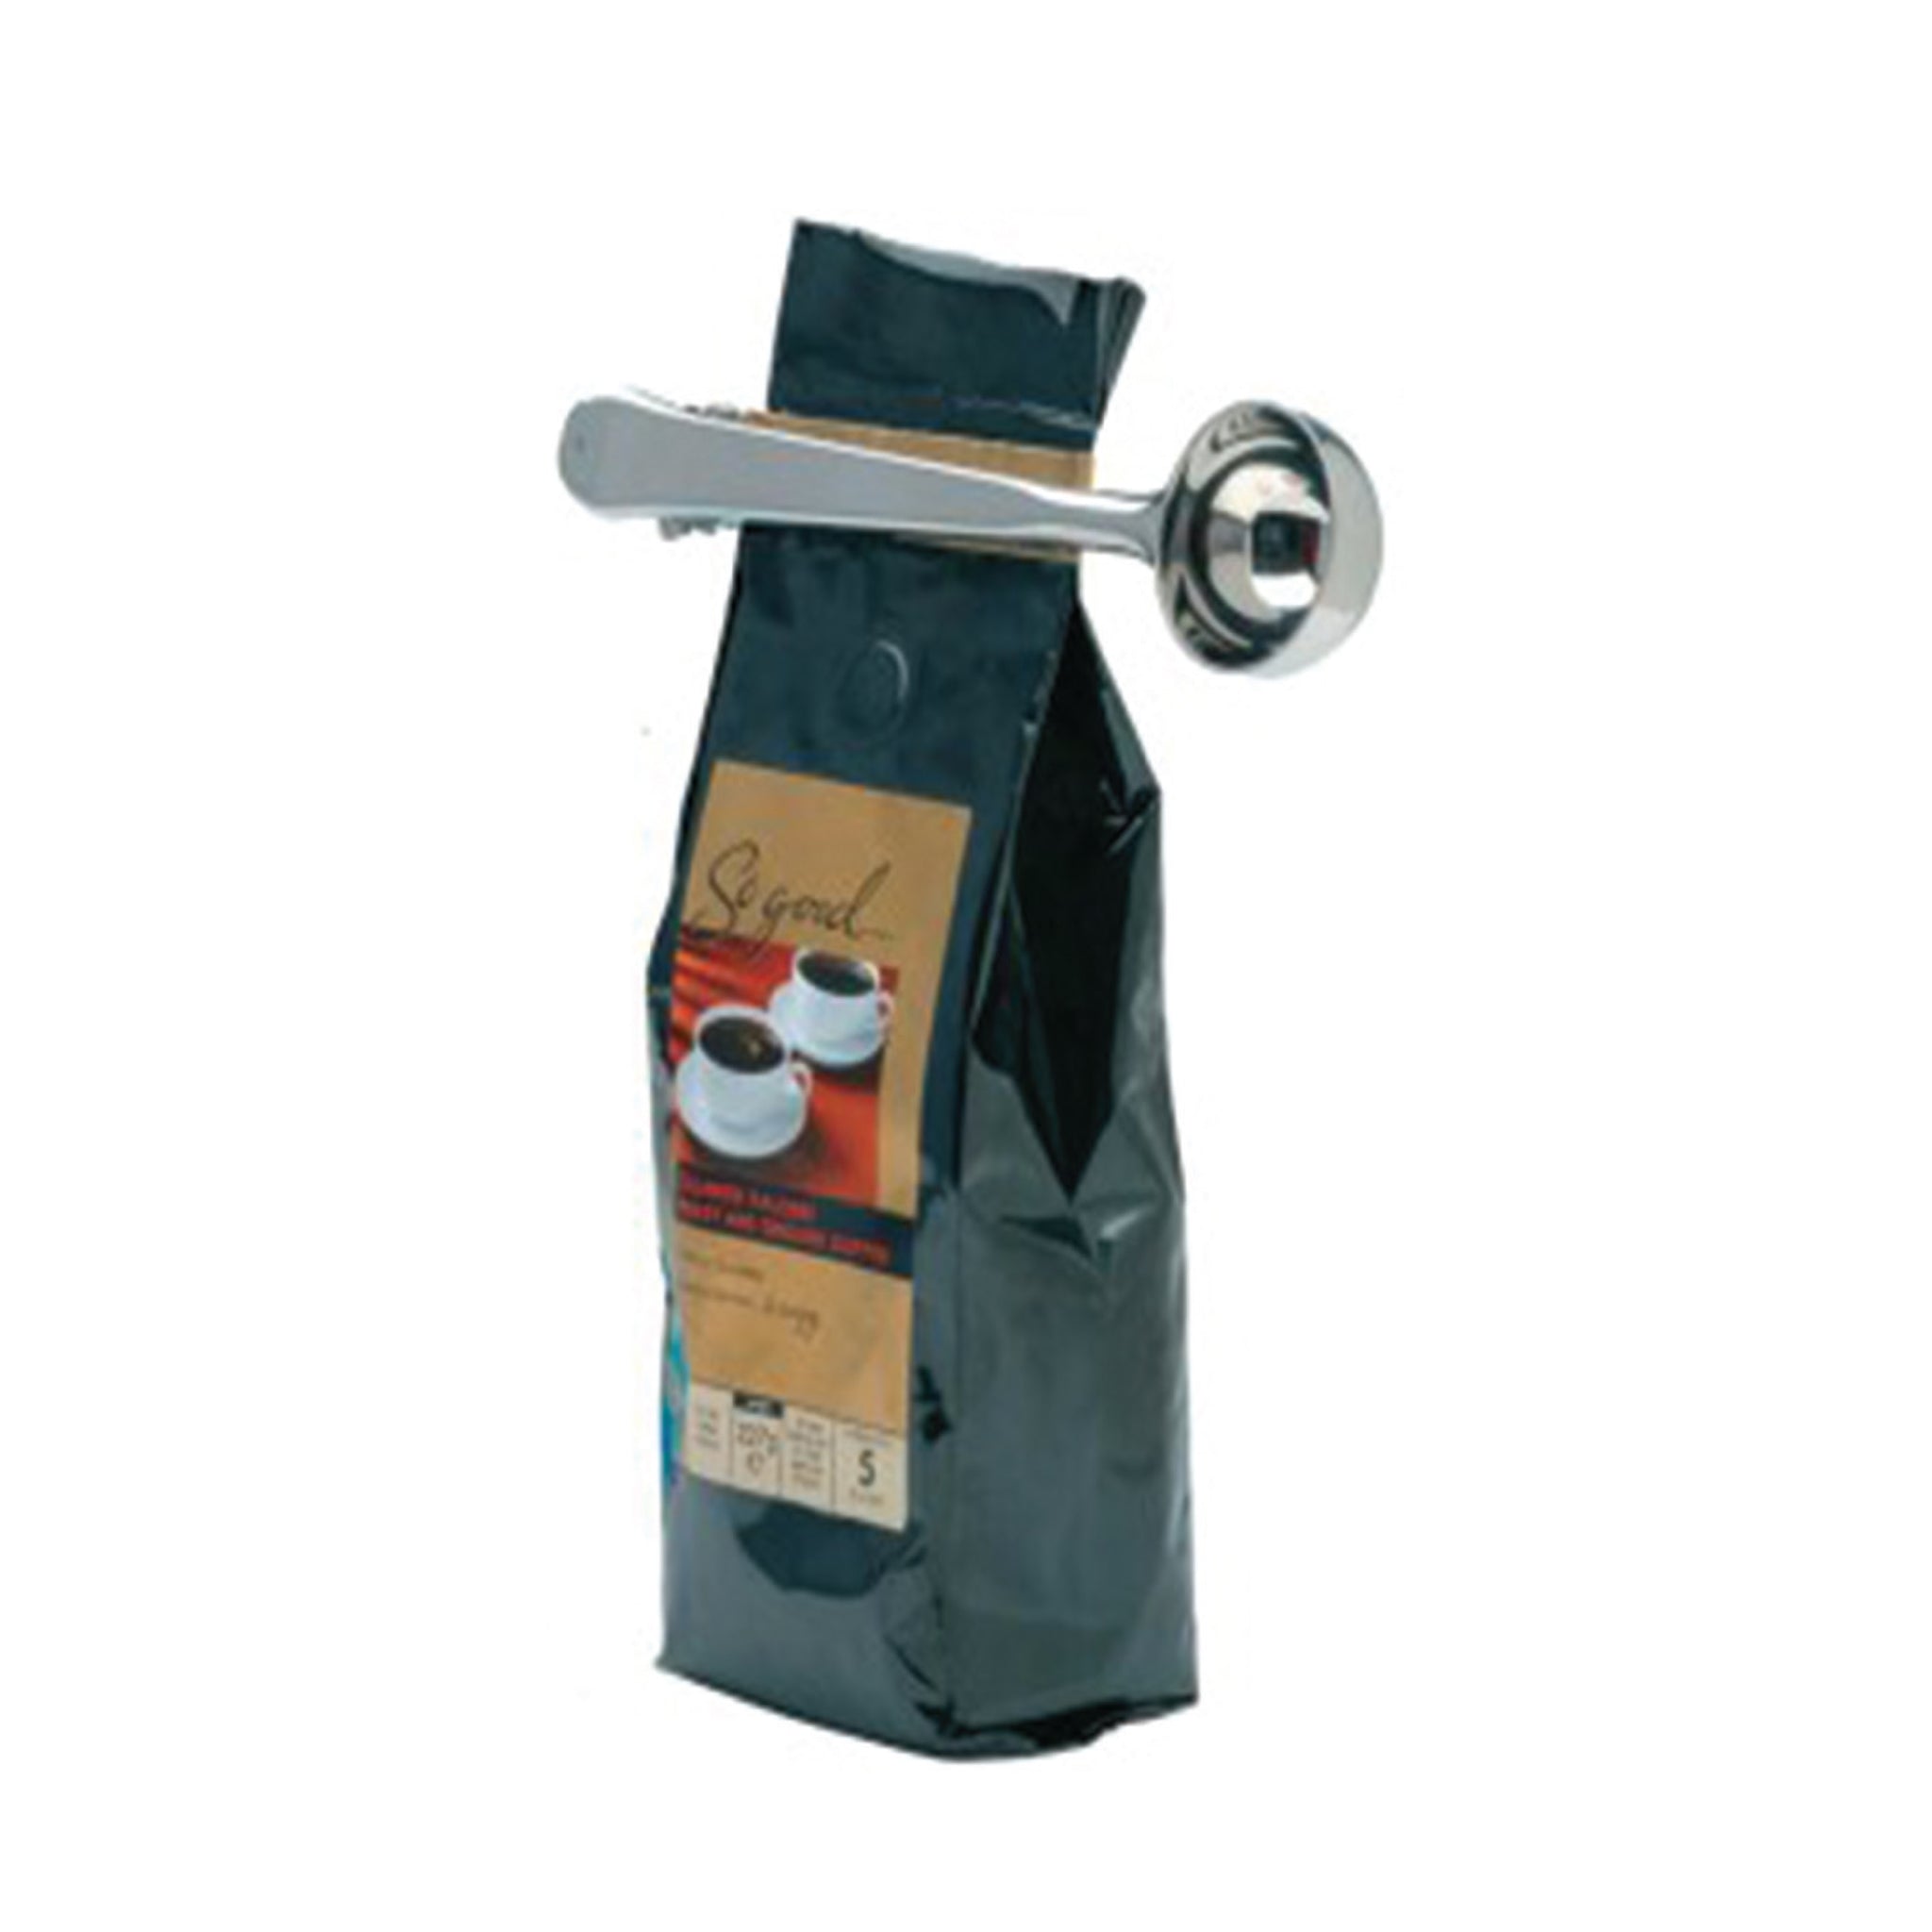 All-In-One Coffee, Tea, Spice Measurer & Bag Clip